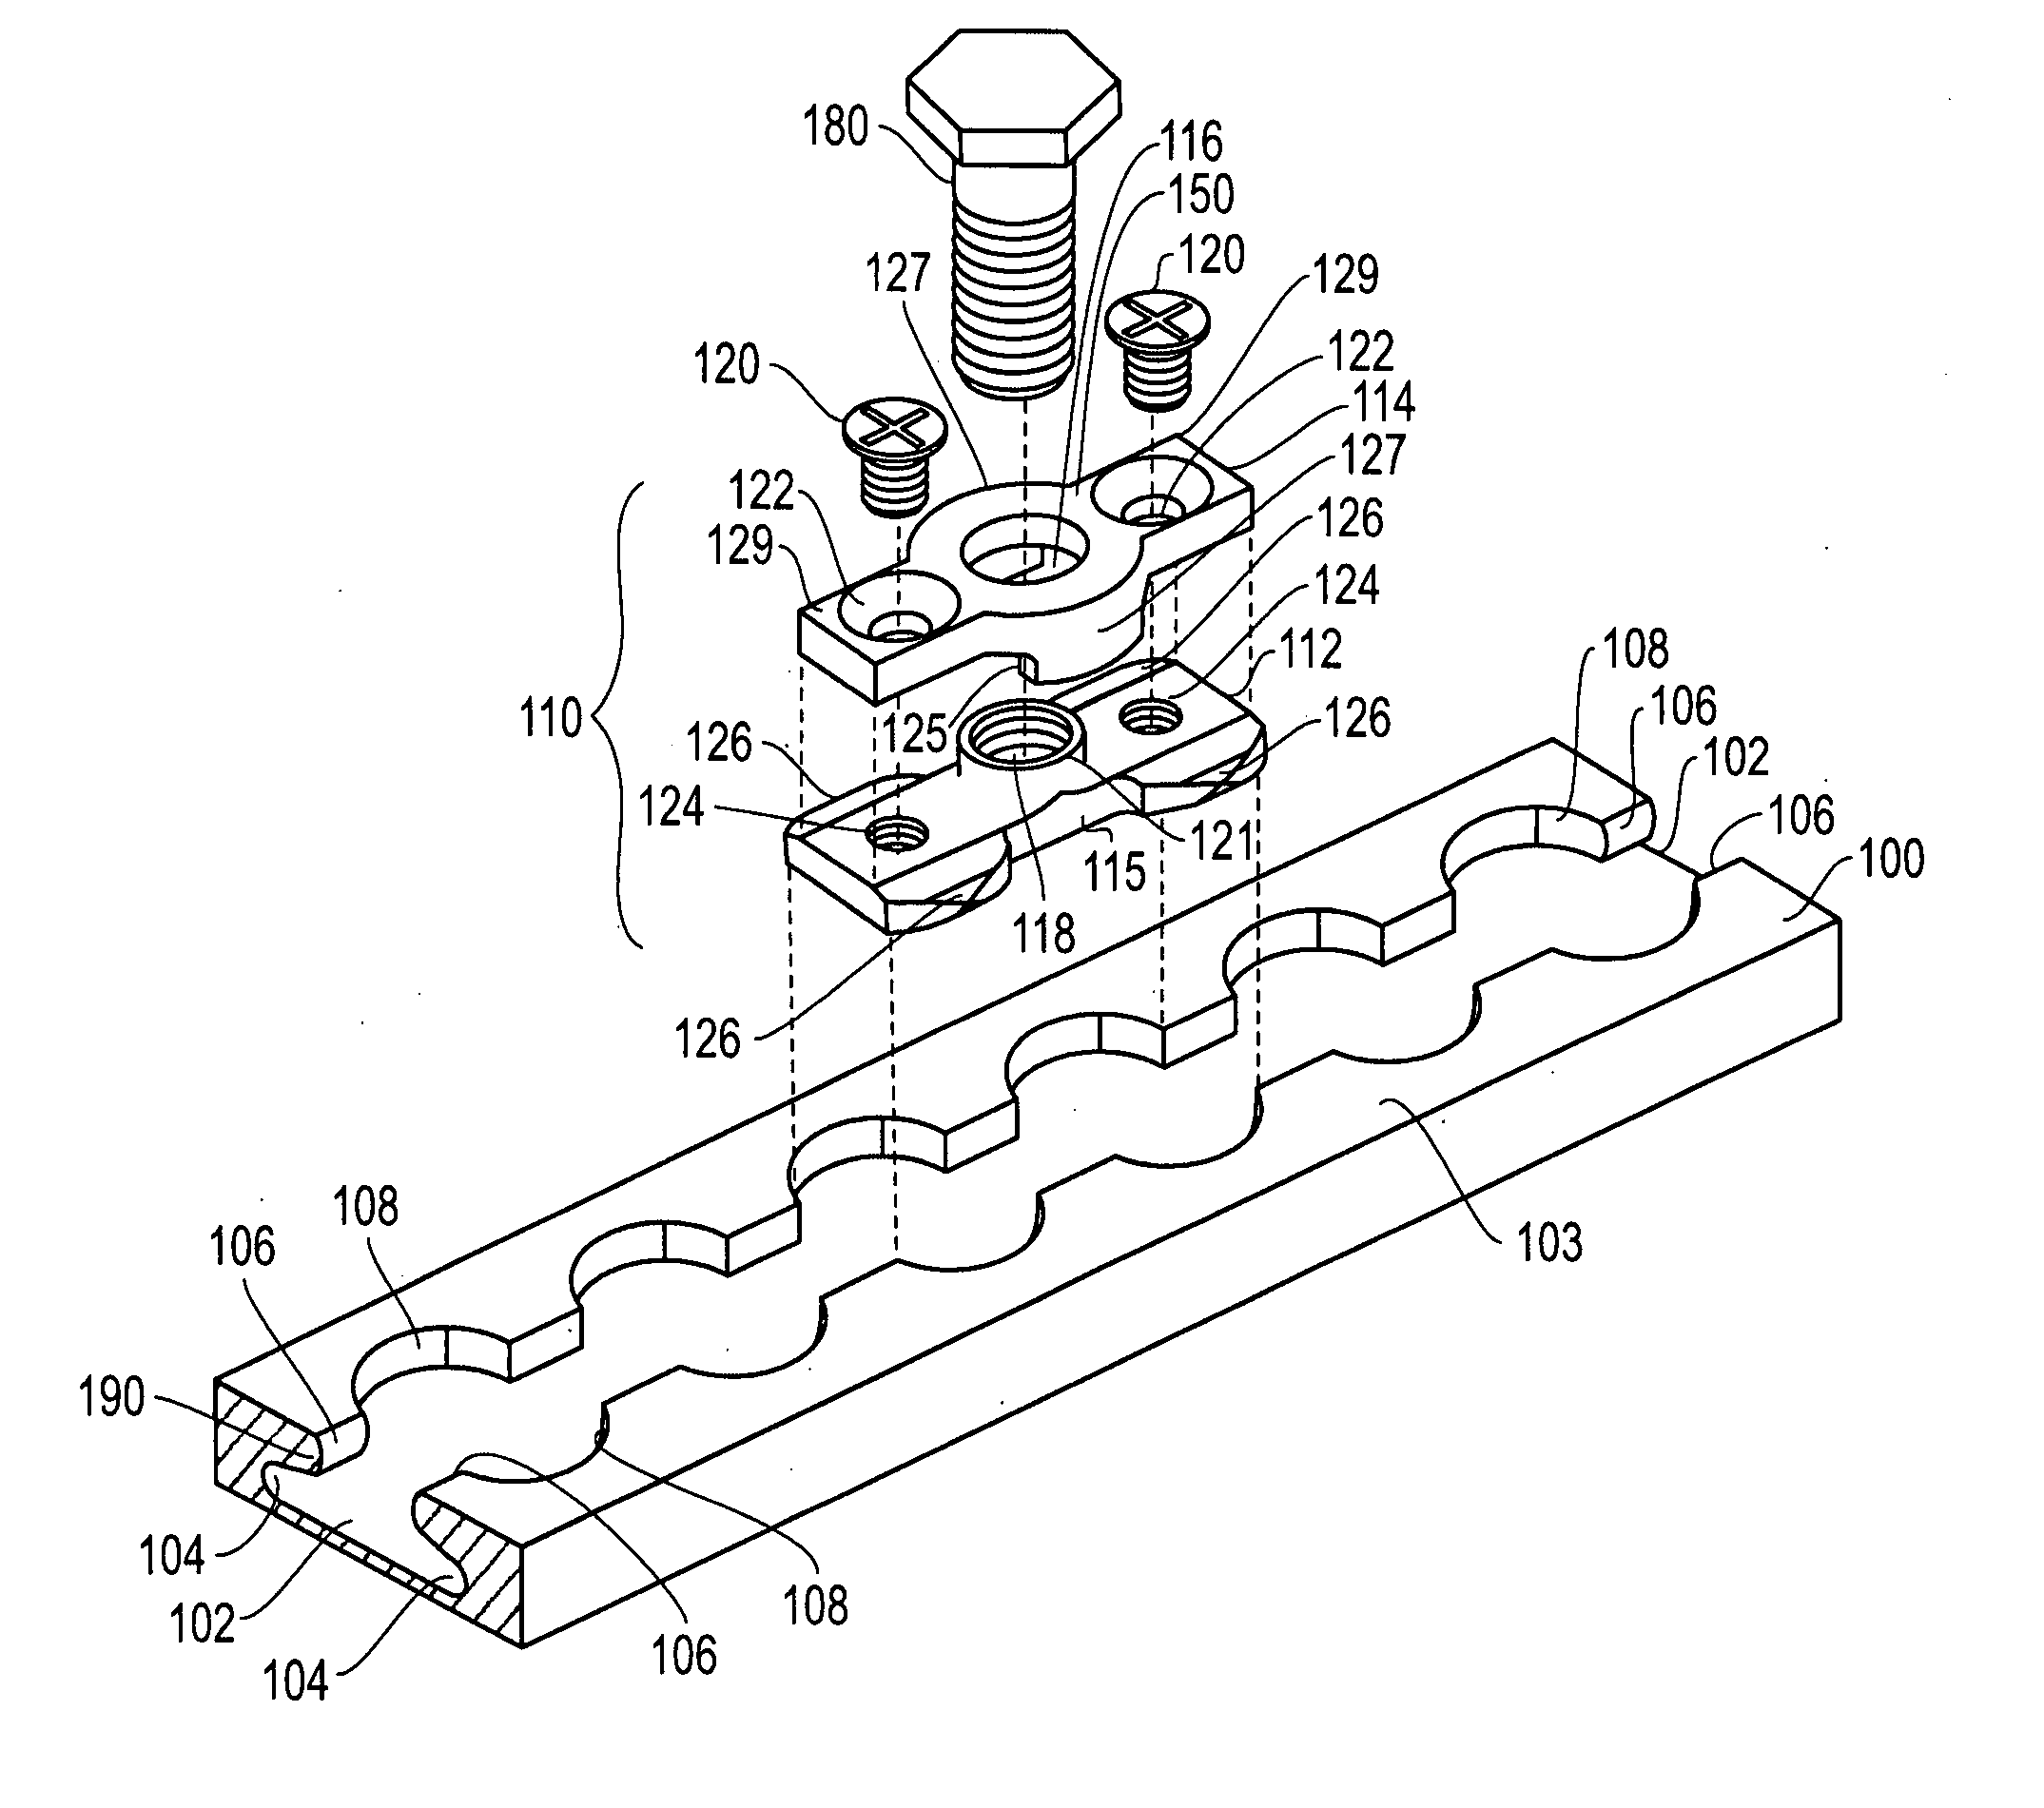 Systems and methods for securing components